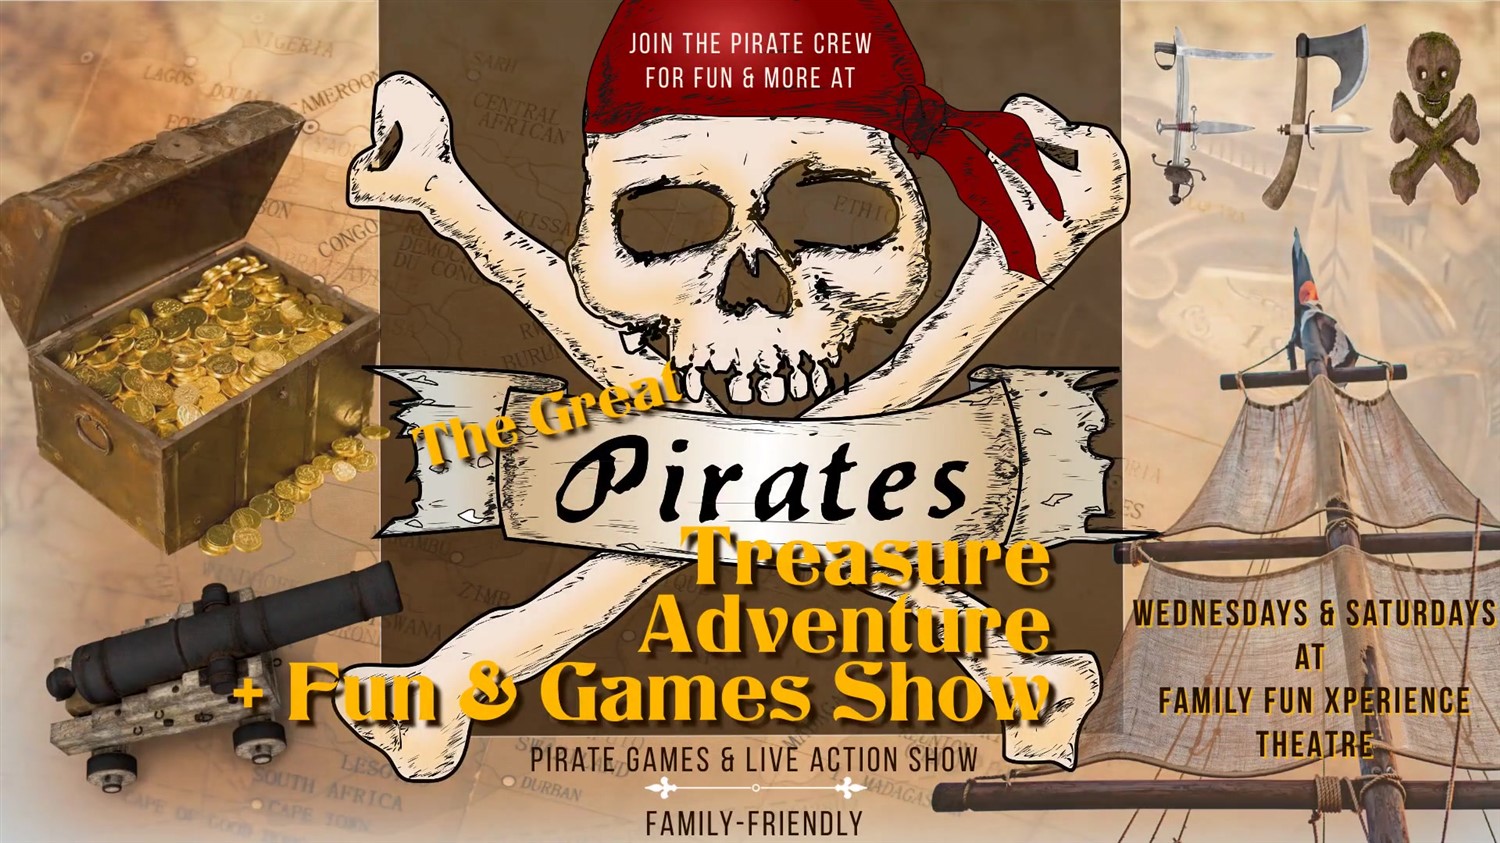 PIRATE ADVENTURE FUN & GAMES SHOW 5-Star Xperience with the Foggy FoX Pirates! on ago. 27, 19:00@FFX Theatre - Pick a seat, Buy tickets and Get information on Family Fun Xperience tickets.ffxshow.org